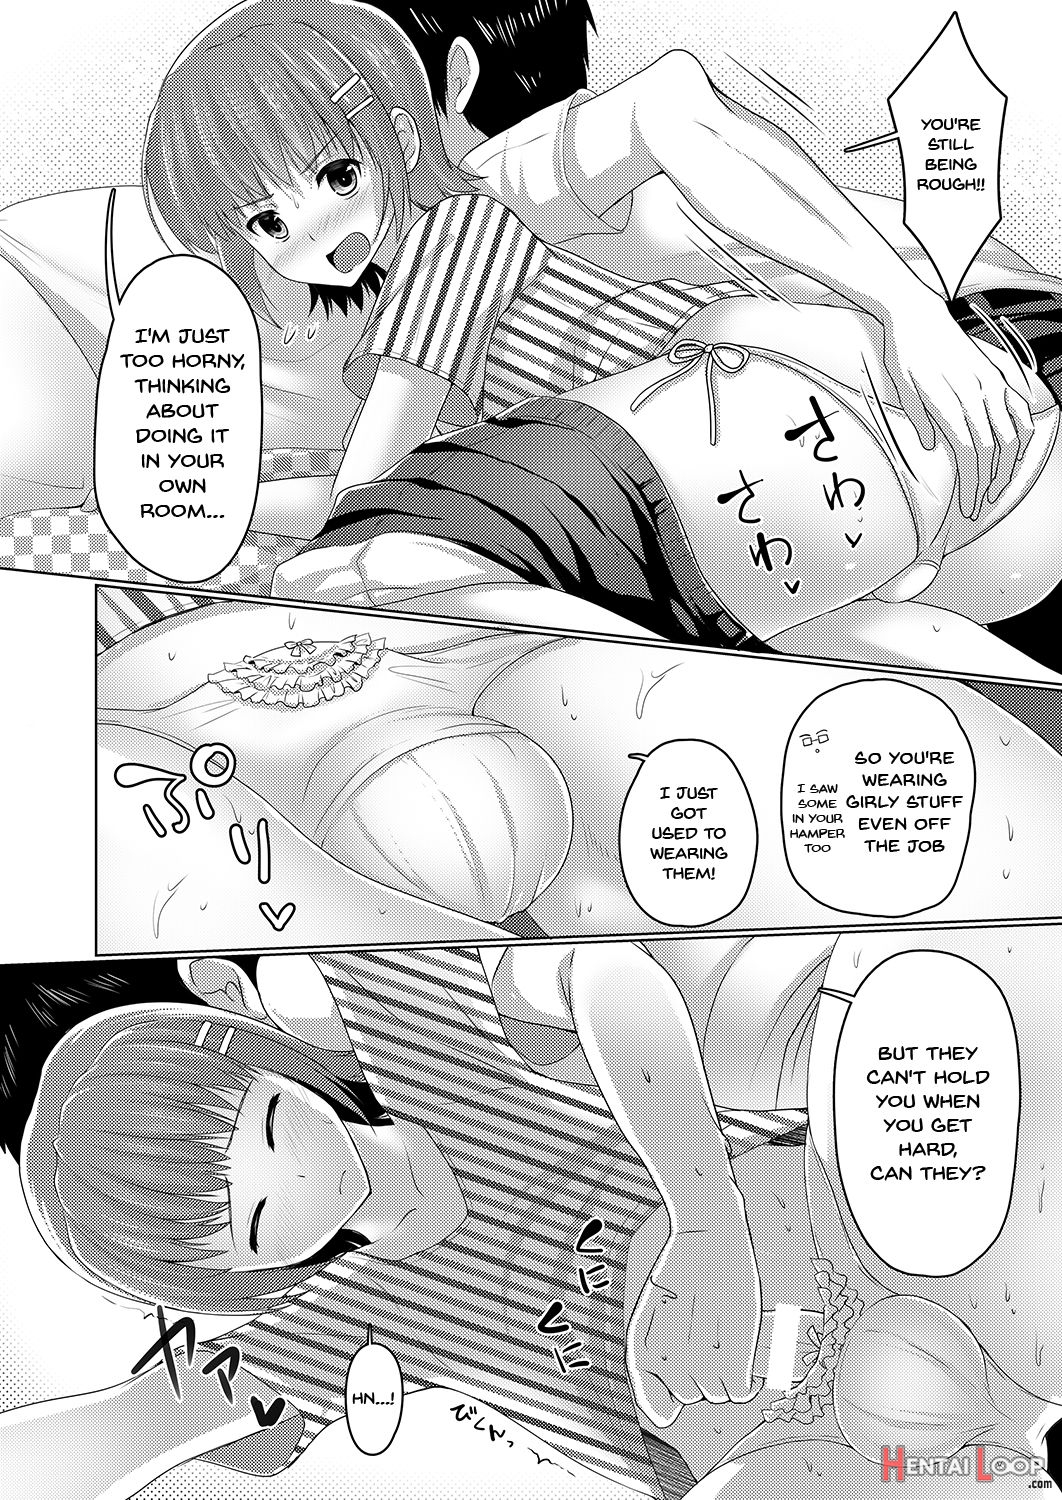 An Eroge Writer Whose Work Never Sells Decided To Crossdress So He Could Understand How Women Feel page 4